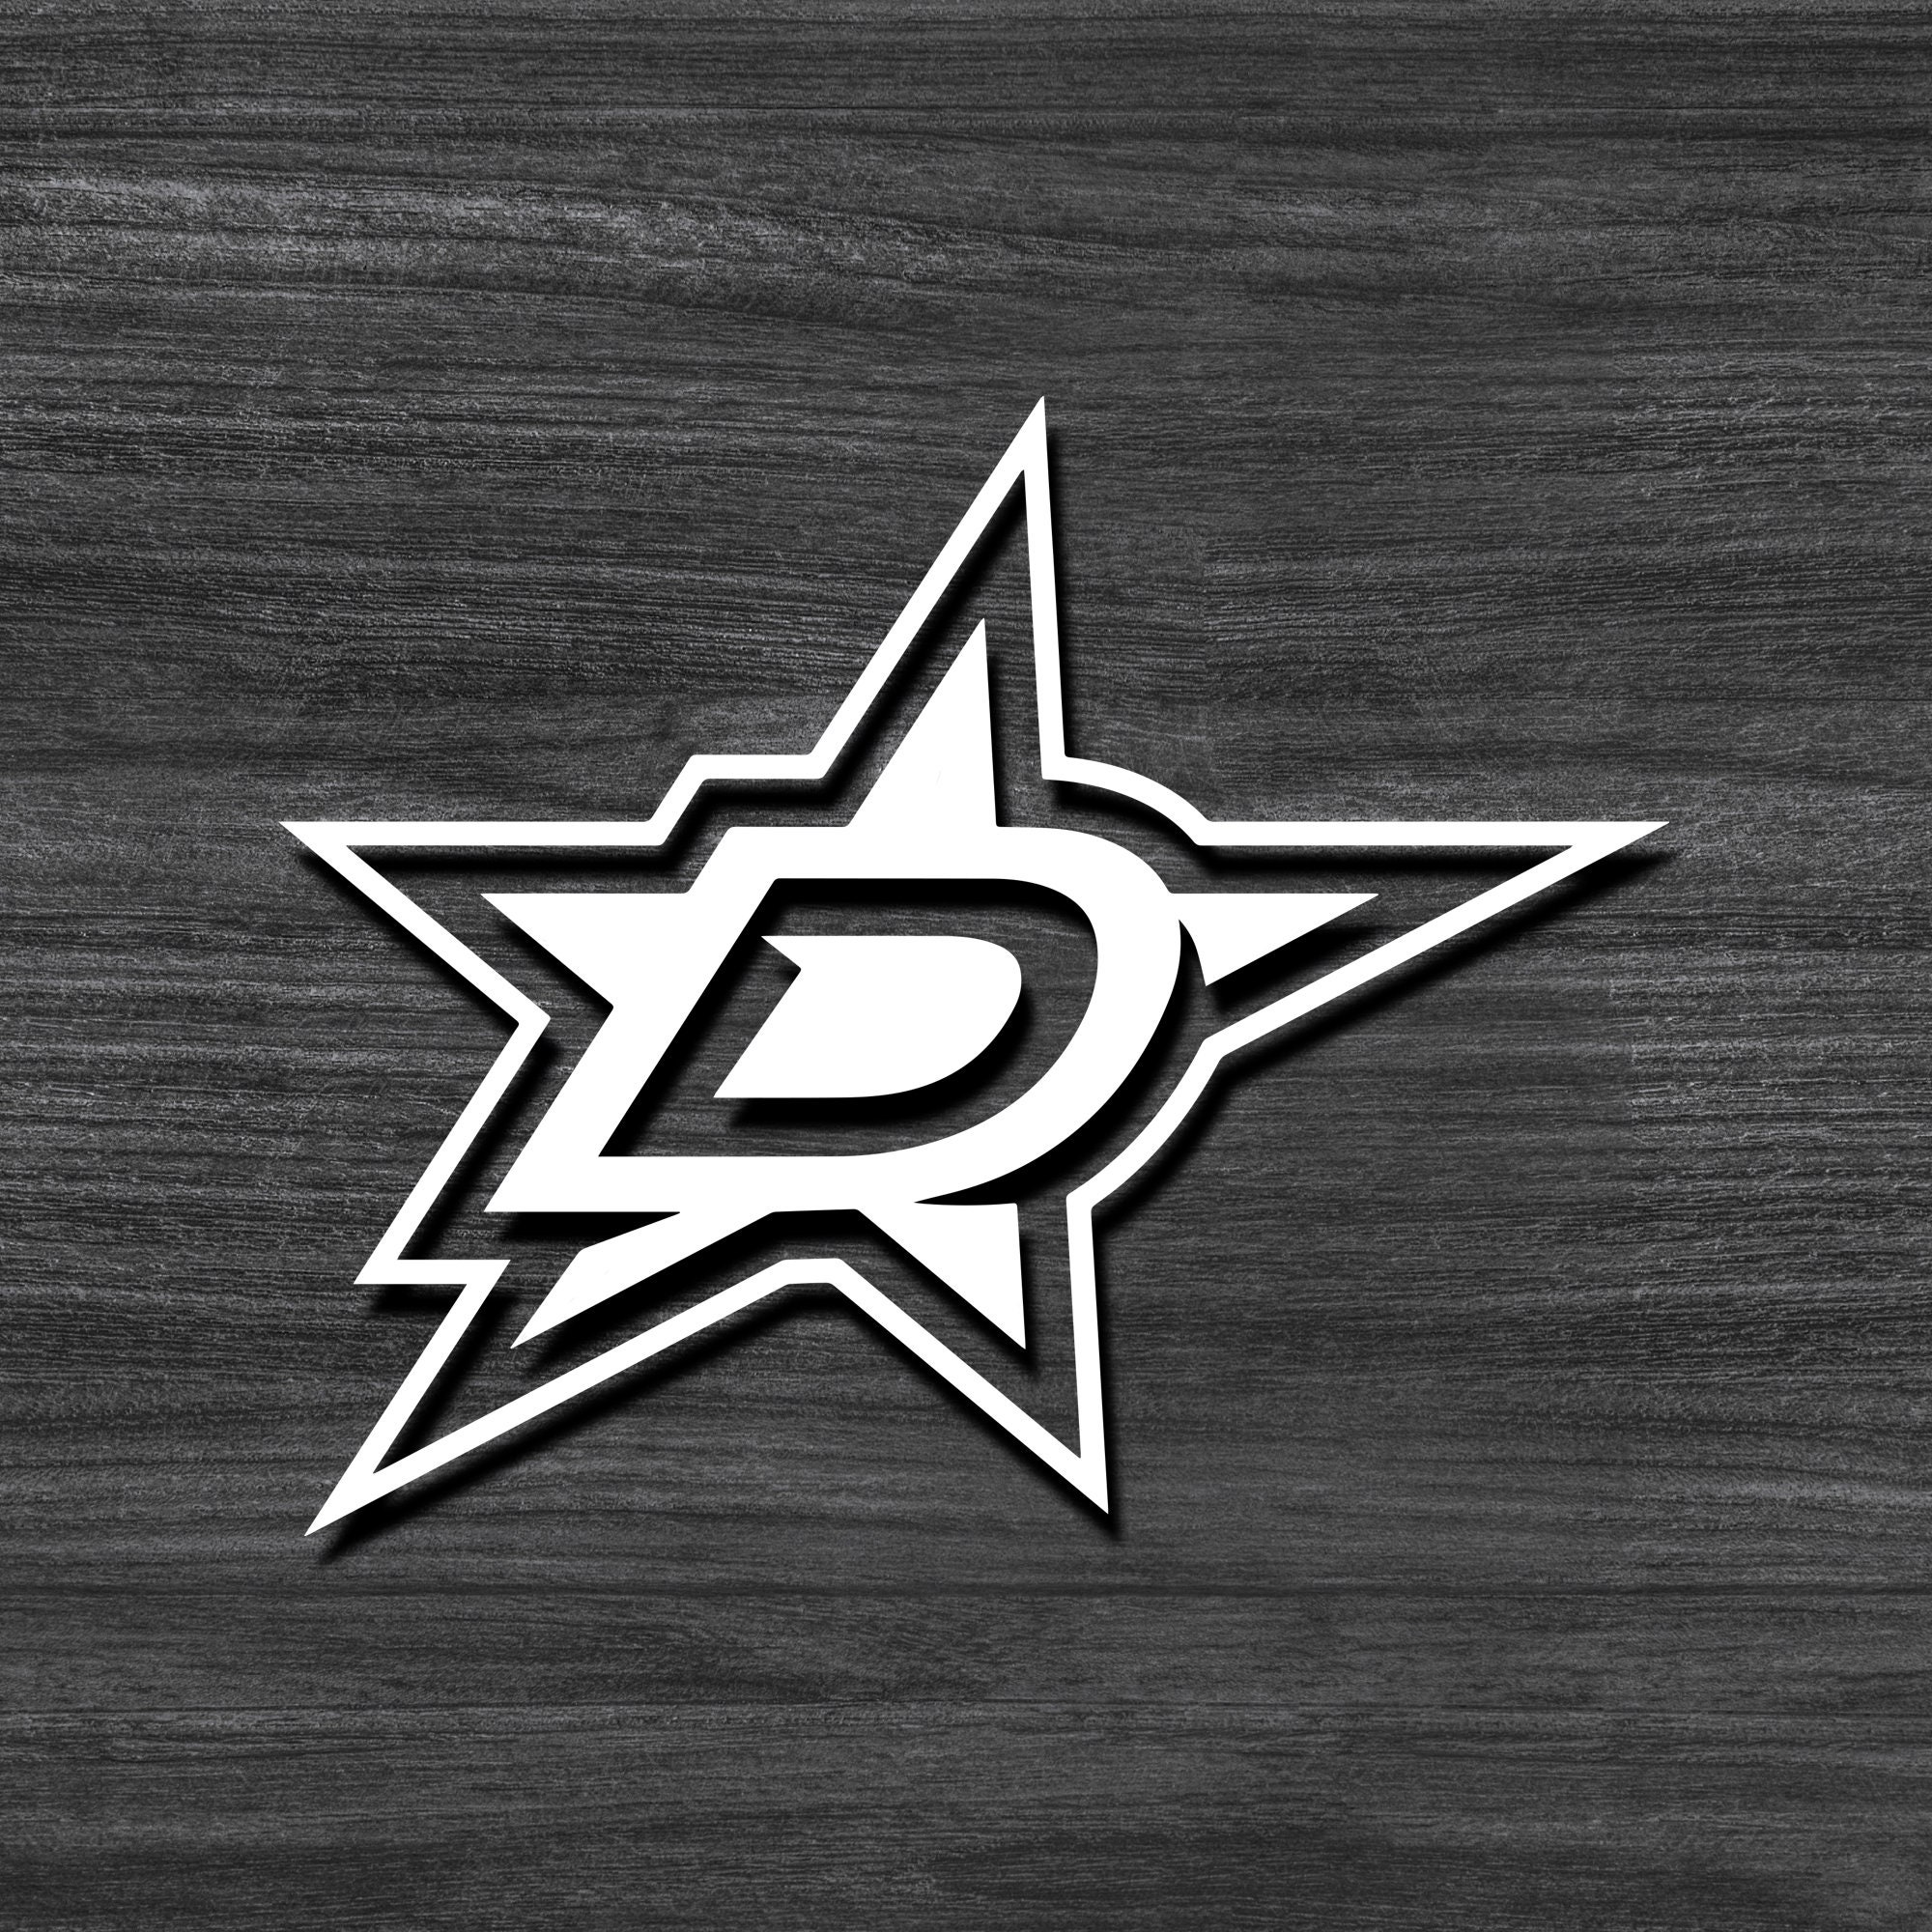 Dallas Stars NHL Vinyl Decal Sticker - 4" and Larger - 30+